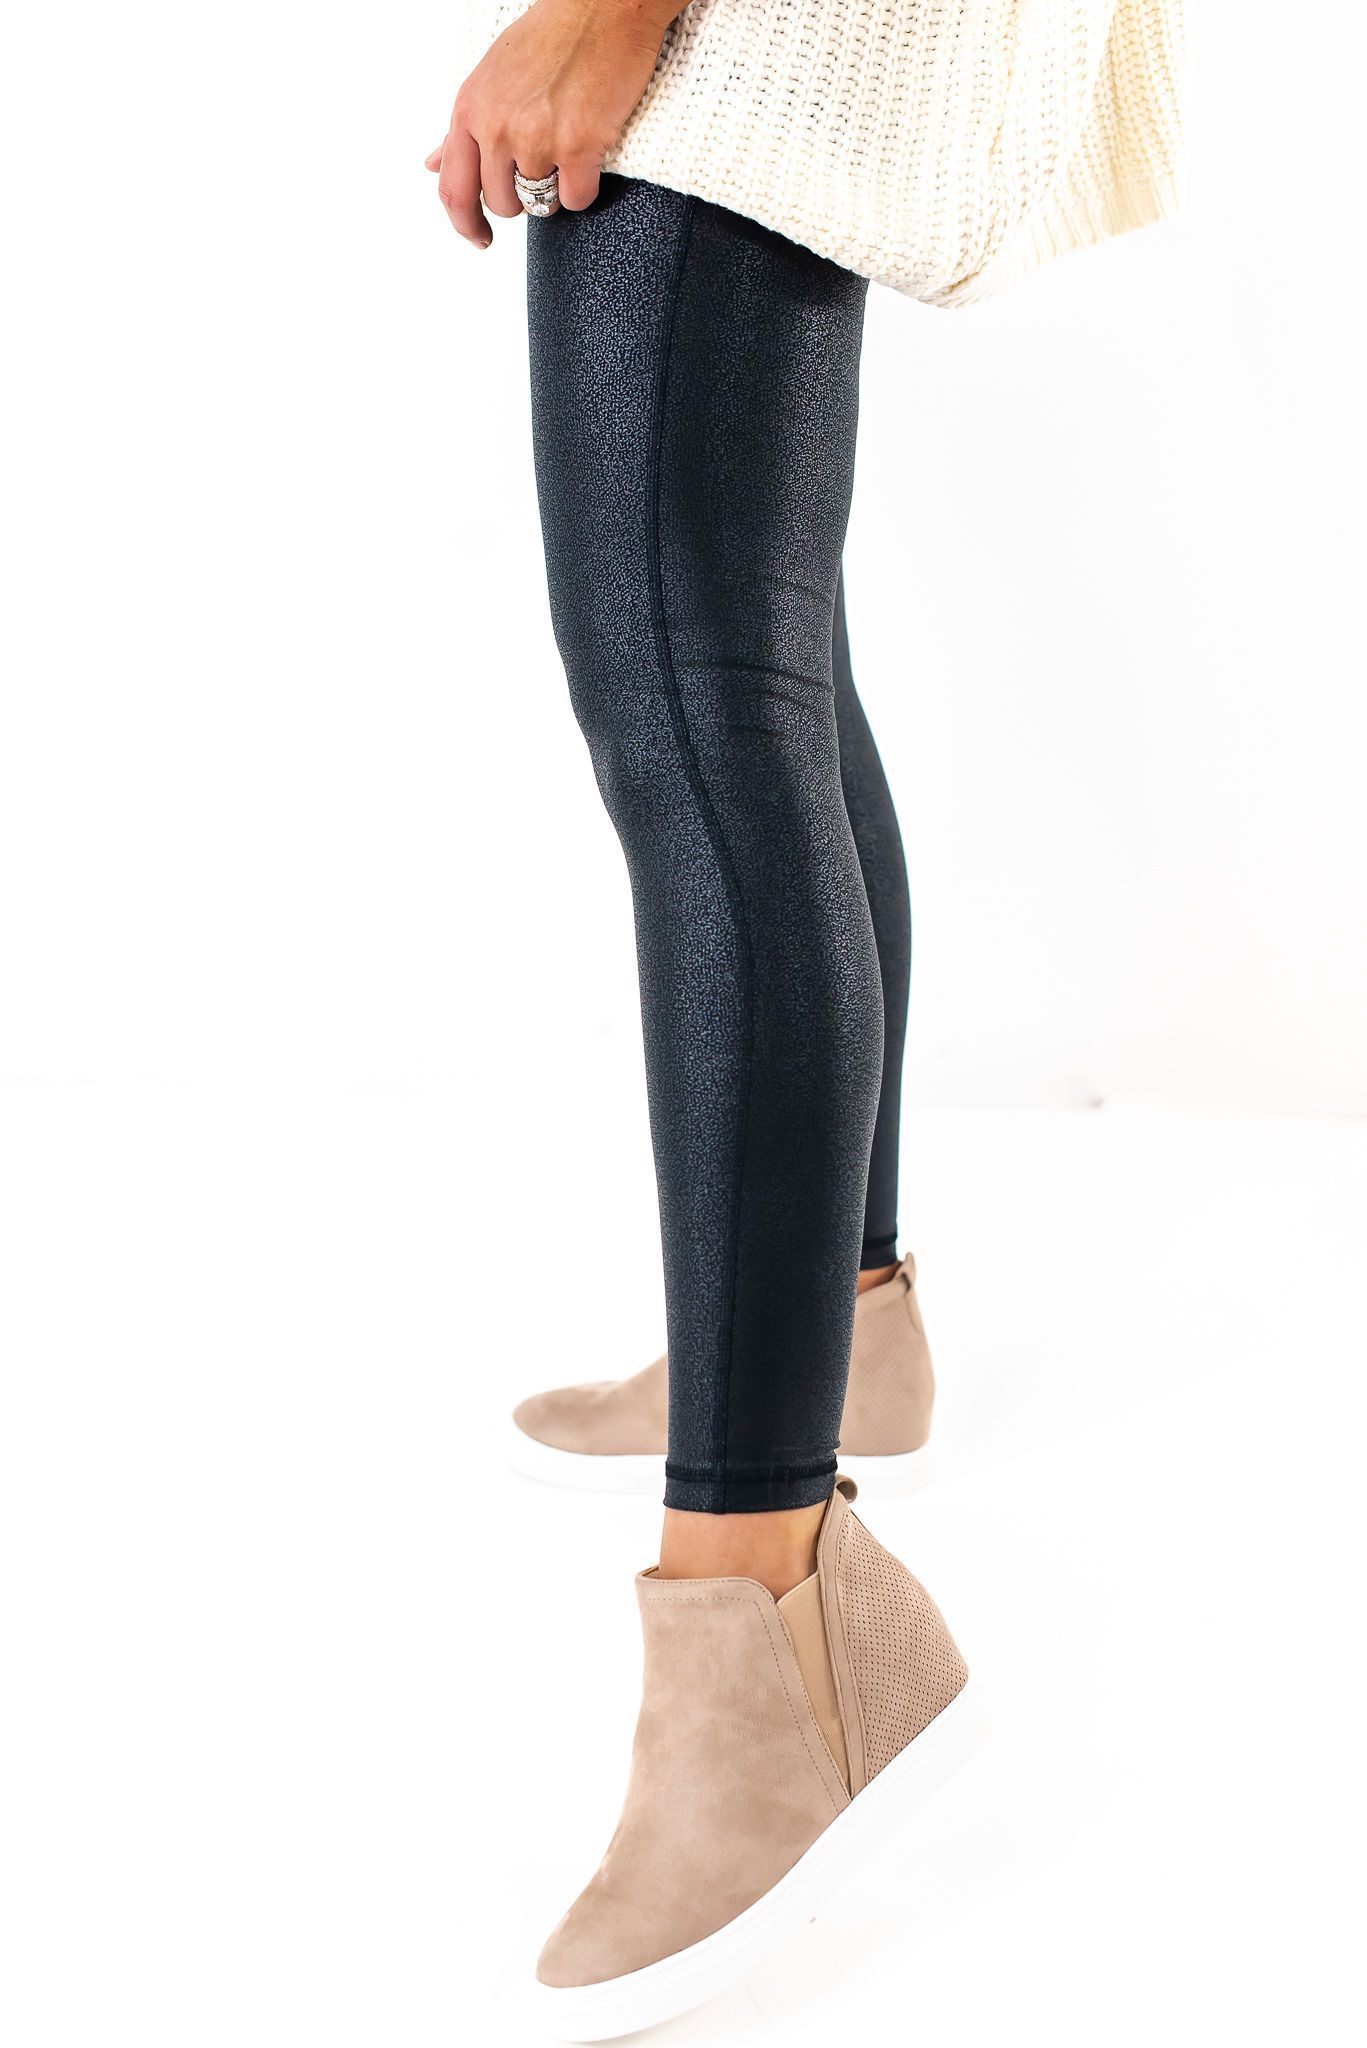 The cutest pebbled leggings from the cutest small shop! A great option of leggings if you don't want to break the bank on the Spanx faux leather leggings.